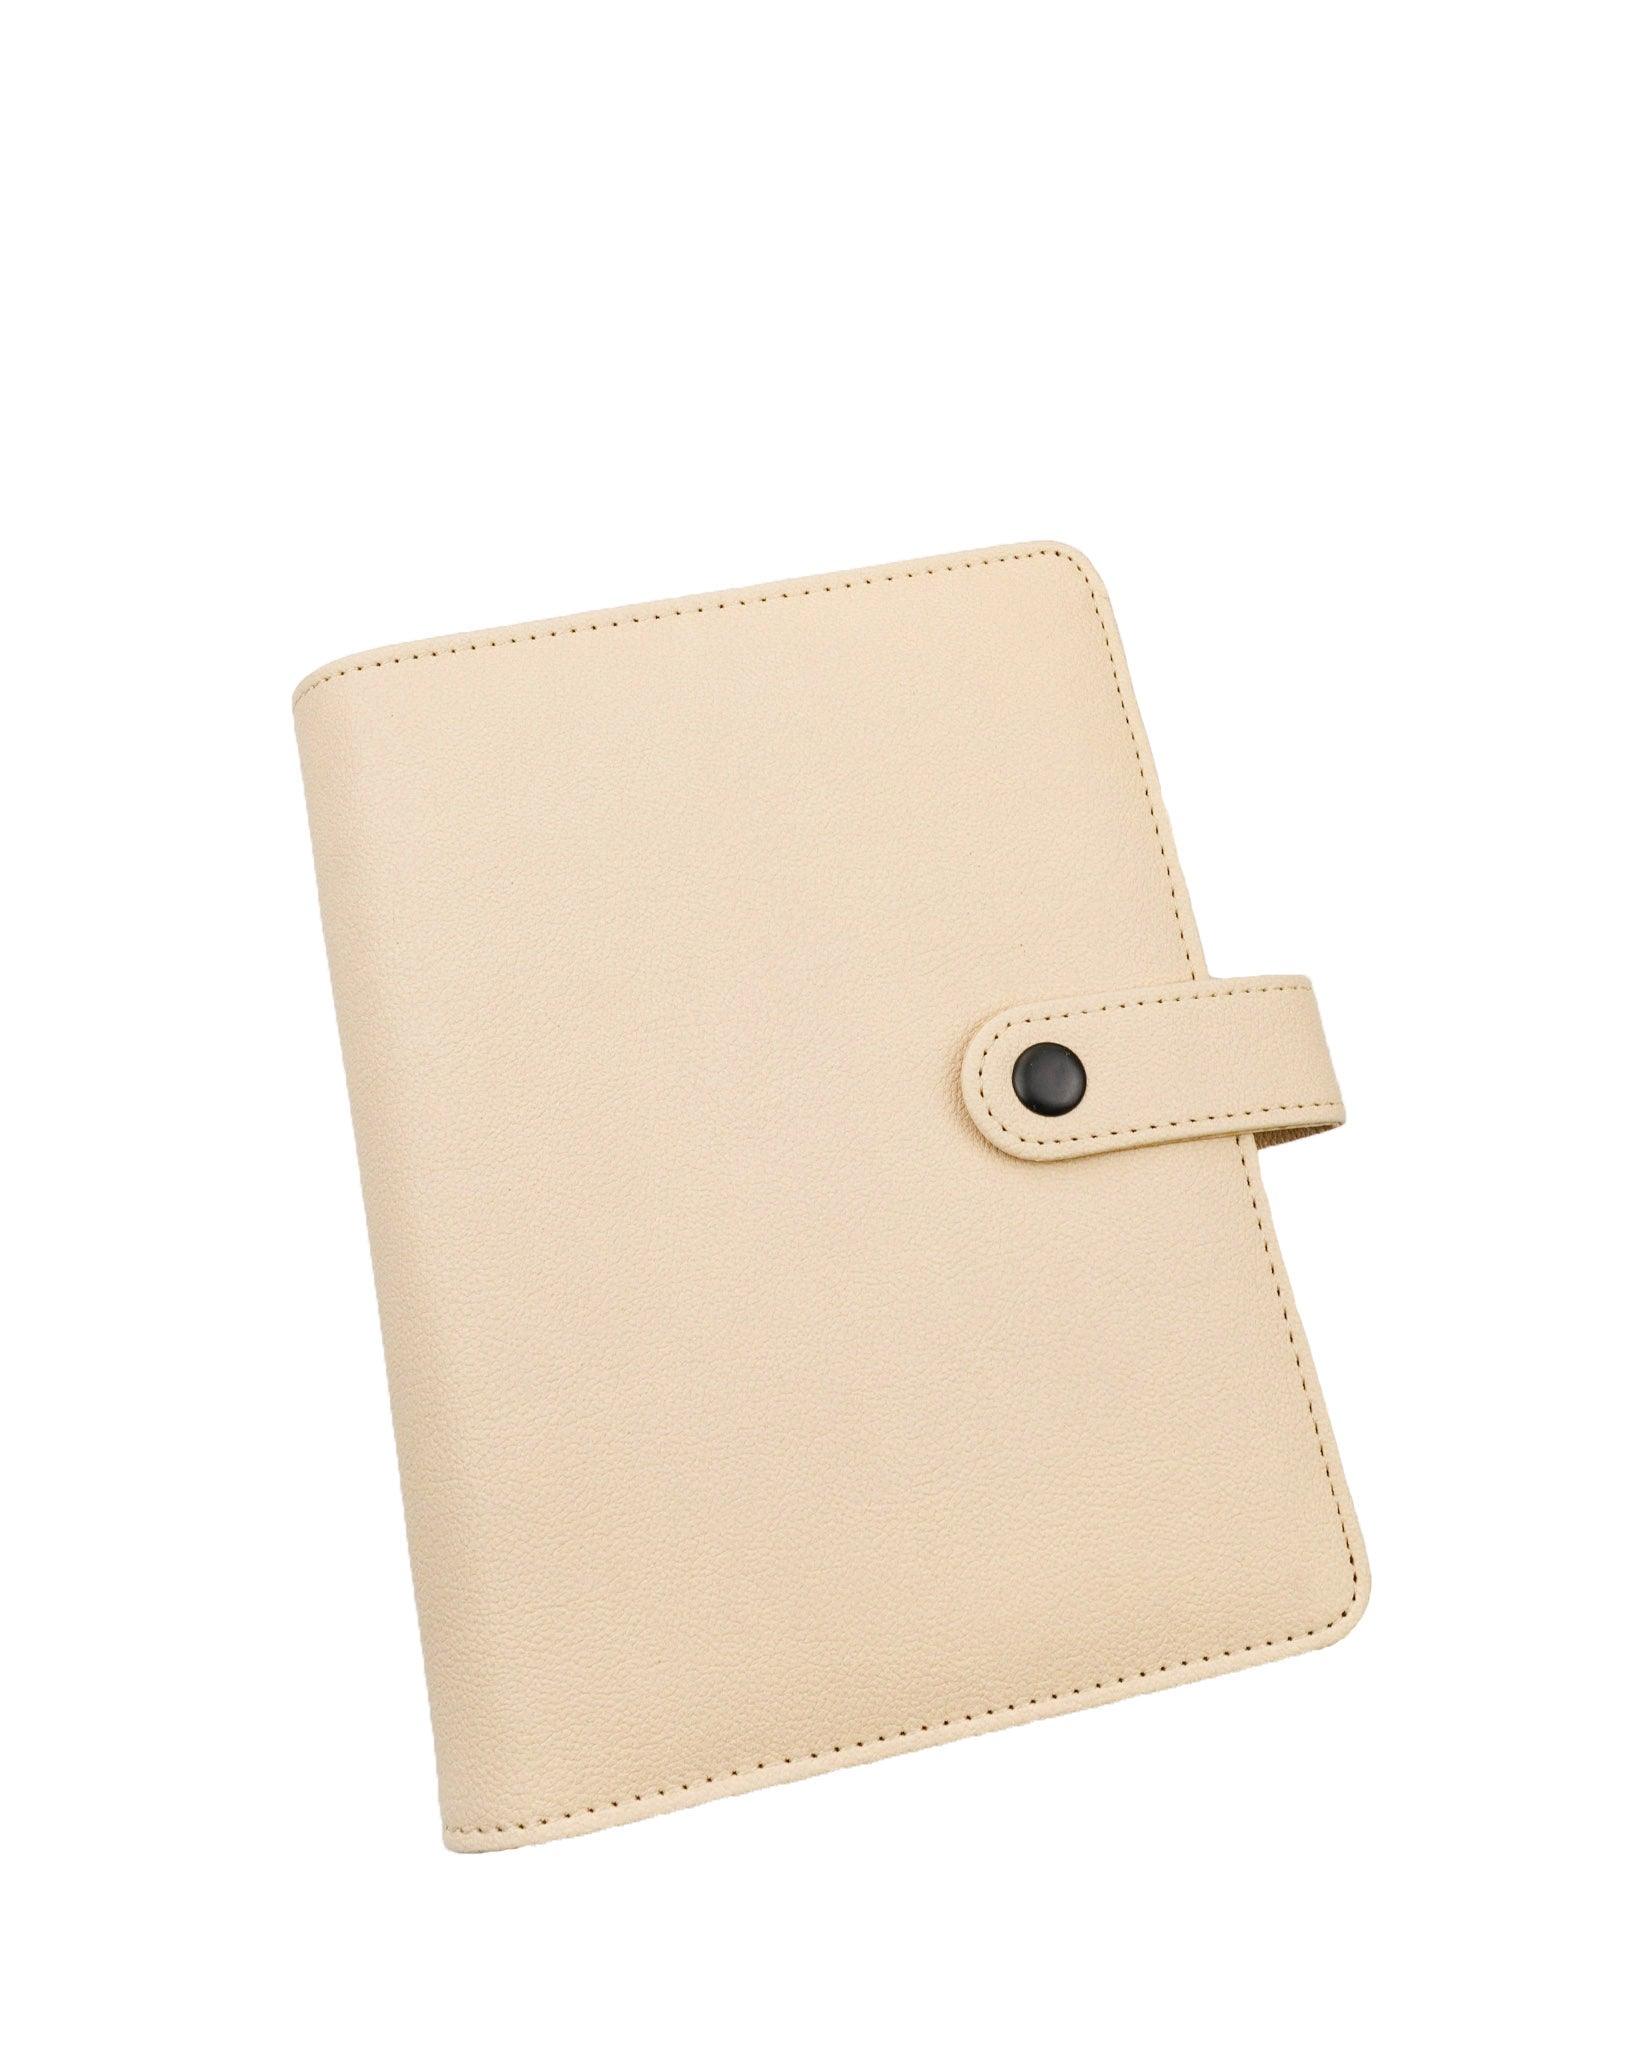 A5 Leather Agenda  6-Ring Binder Gold — Paper Avenue